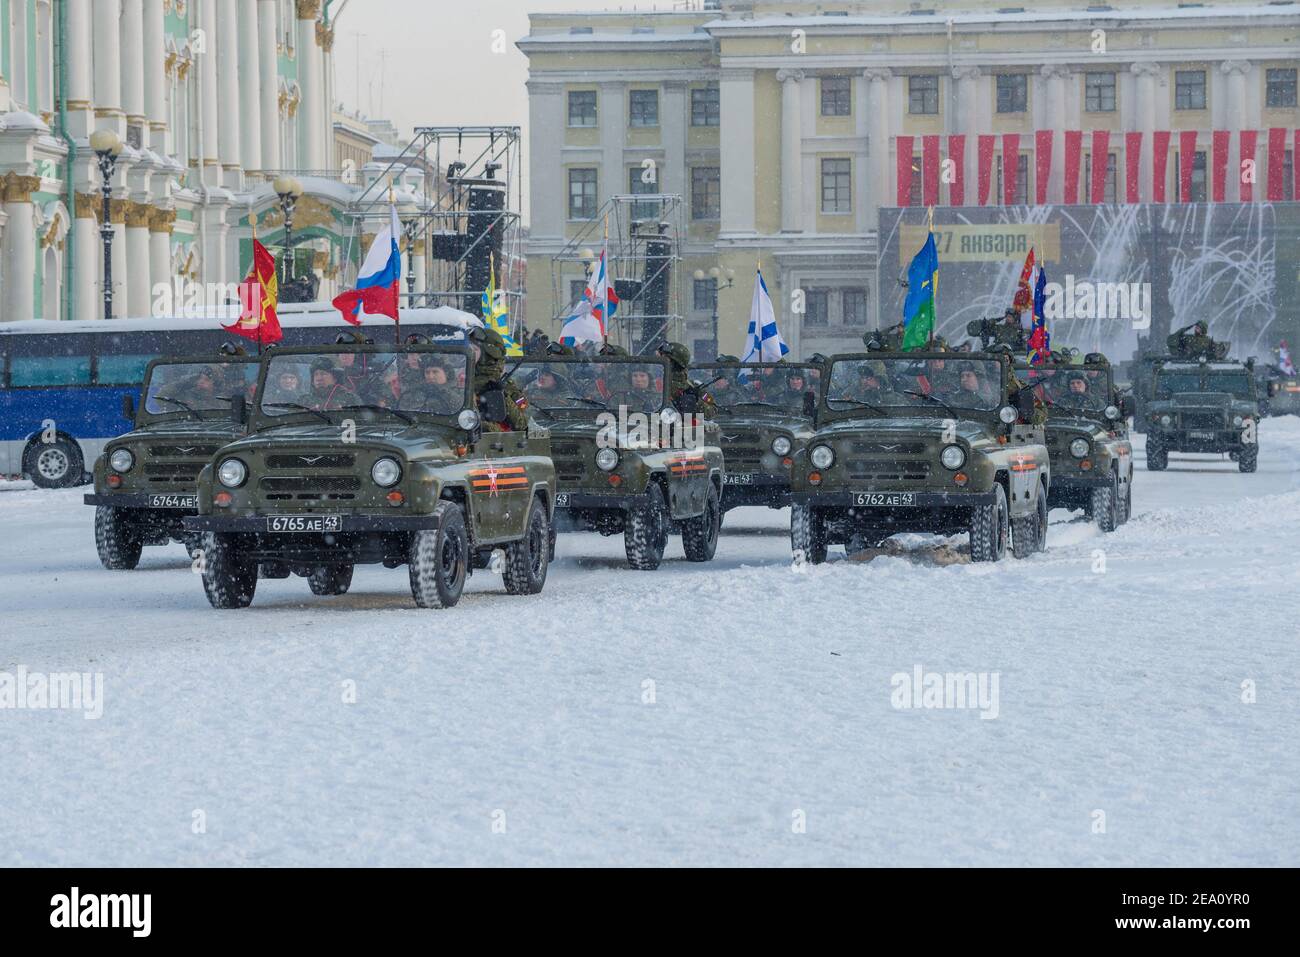 ST. PETERSBURG, RUSSIA - JANUARY 24, 2019: Banner group on UAZ military vehicles on a military parade in honor of the lifting of the siege of Leningra Stock Photo